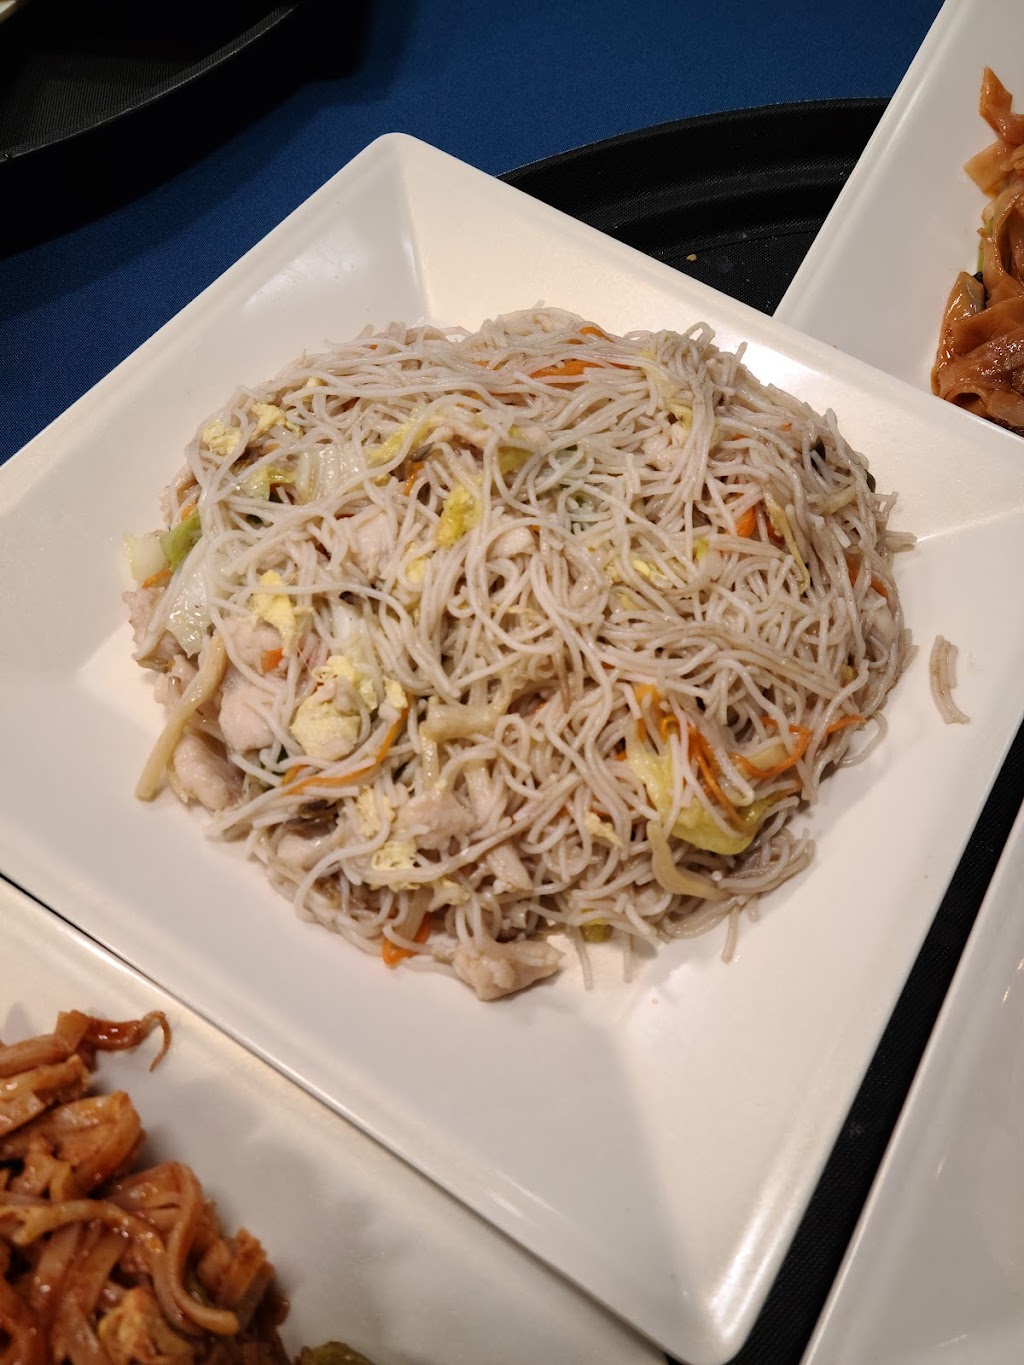 Taam Thai Sushi and Asian Fusion | 1500 Reisterstown Rd Suite 215, Pikesville, MD 21208, USA | Phone: (410) 484-0585